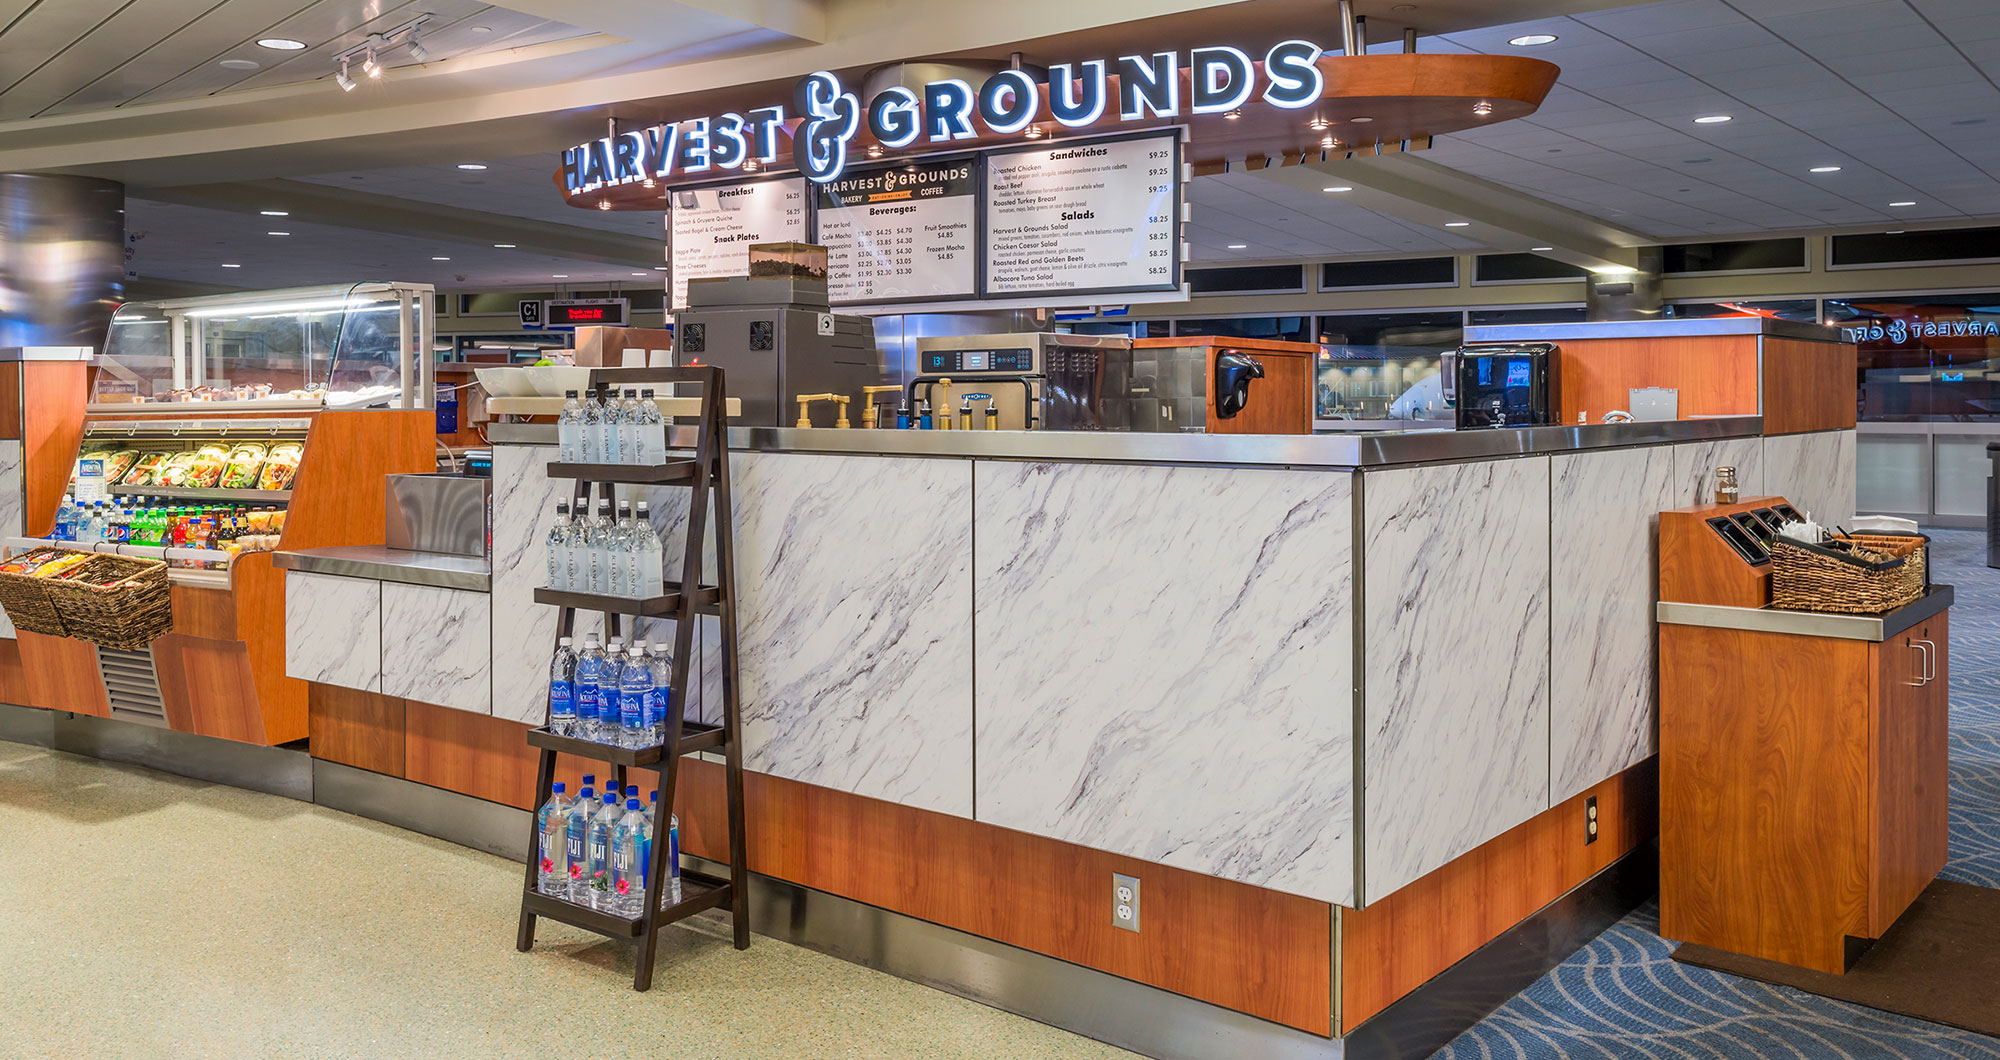 Harvest & Grounds in Boise Air Terminal